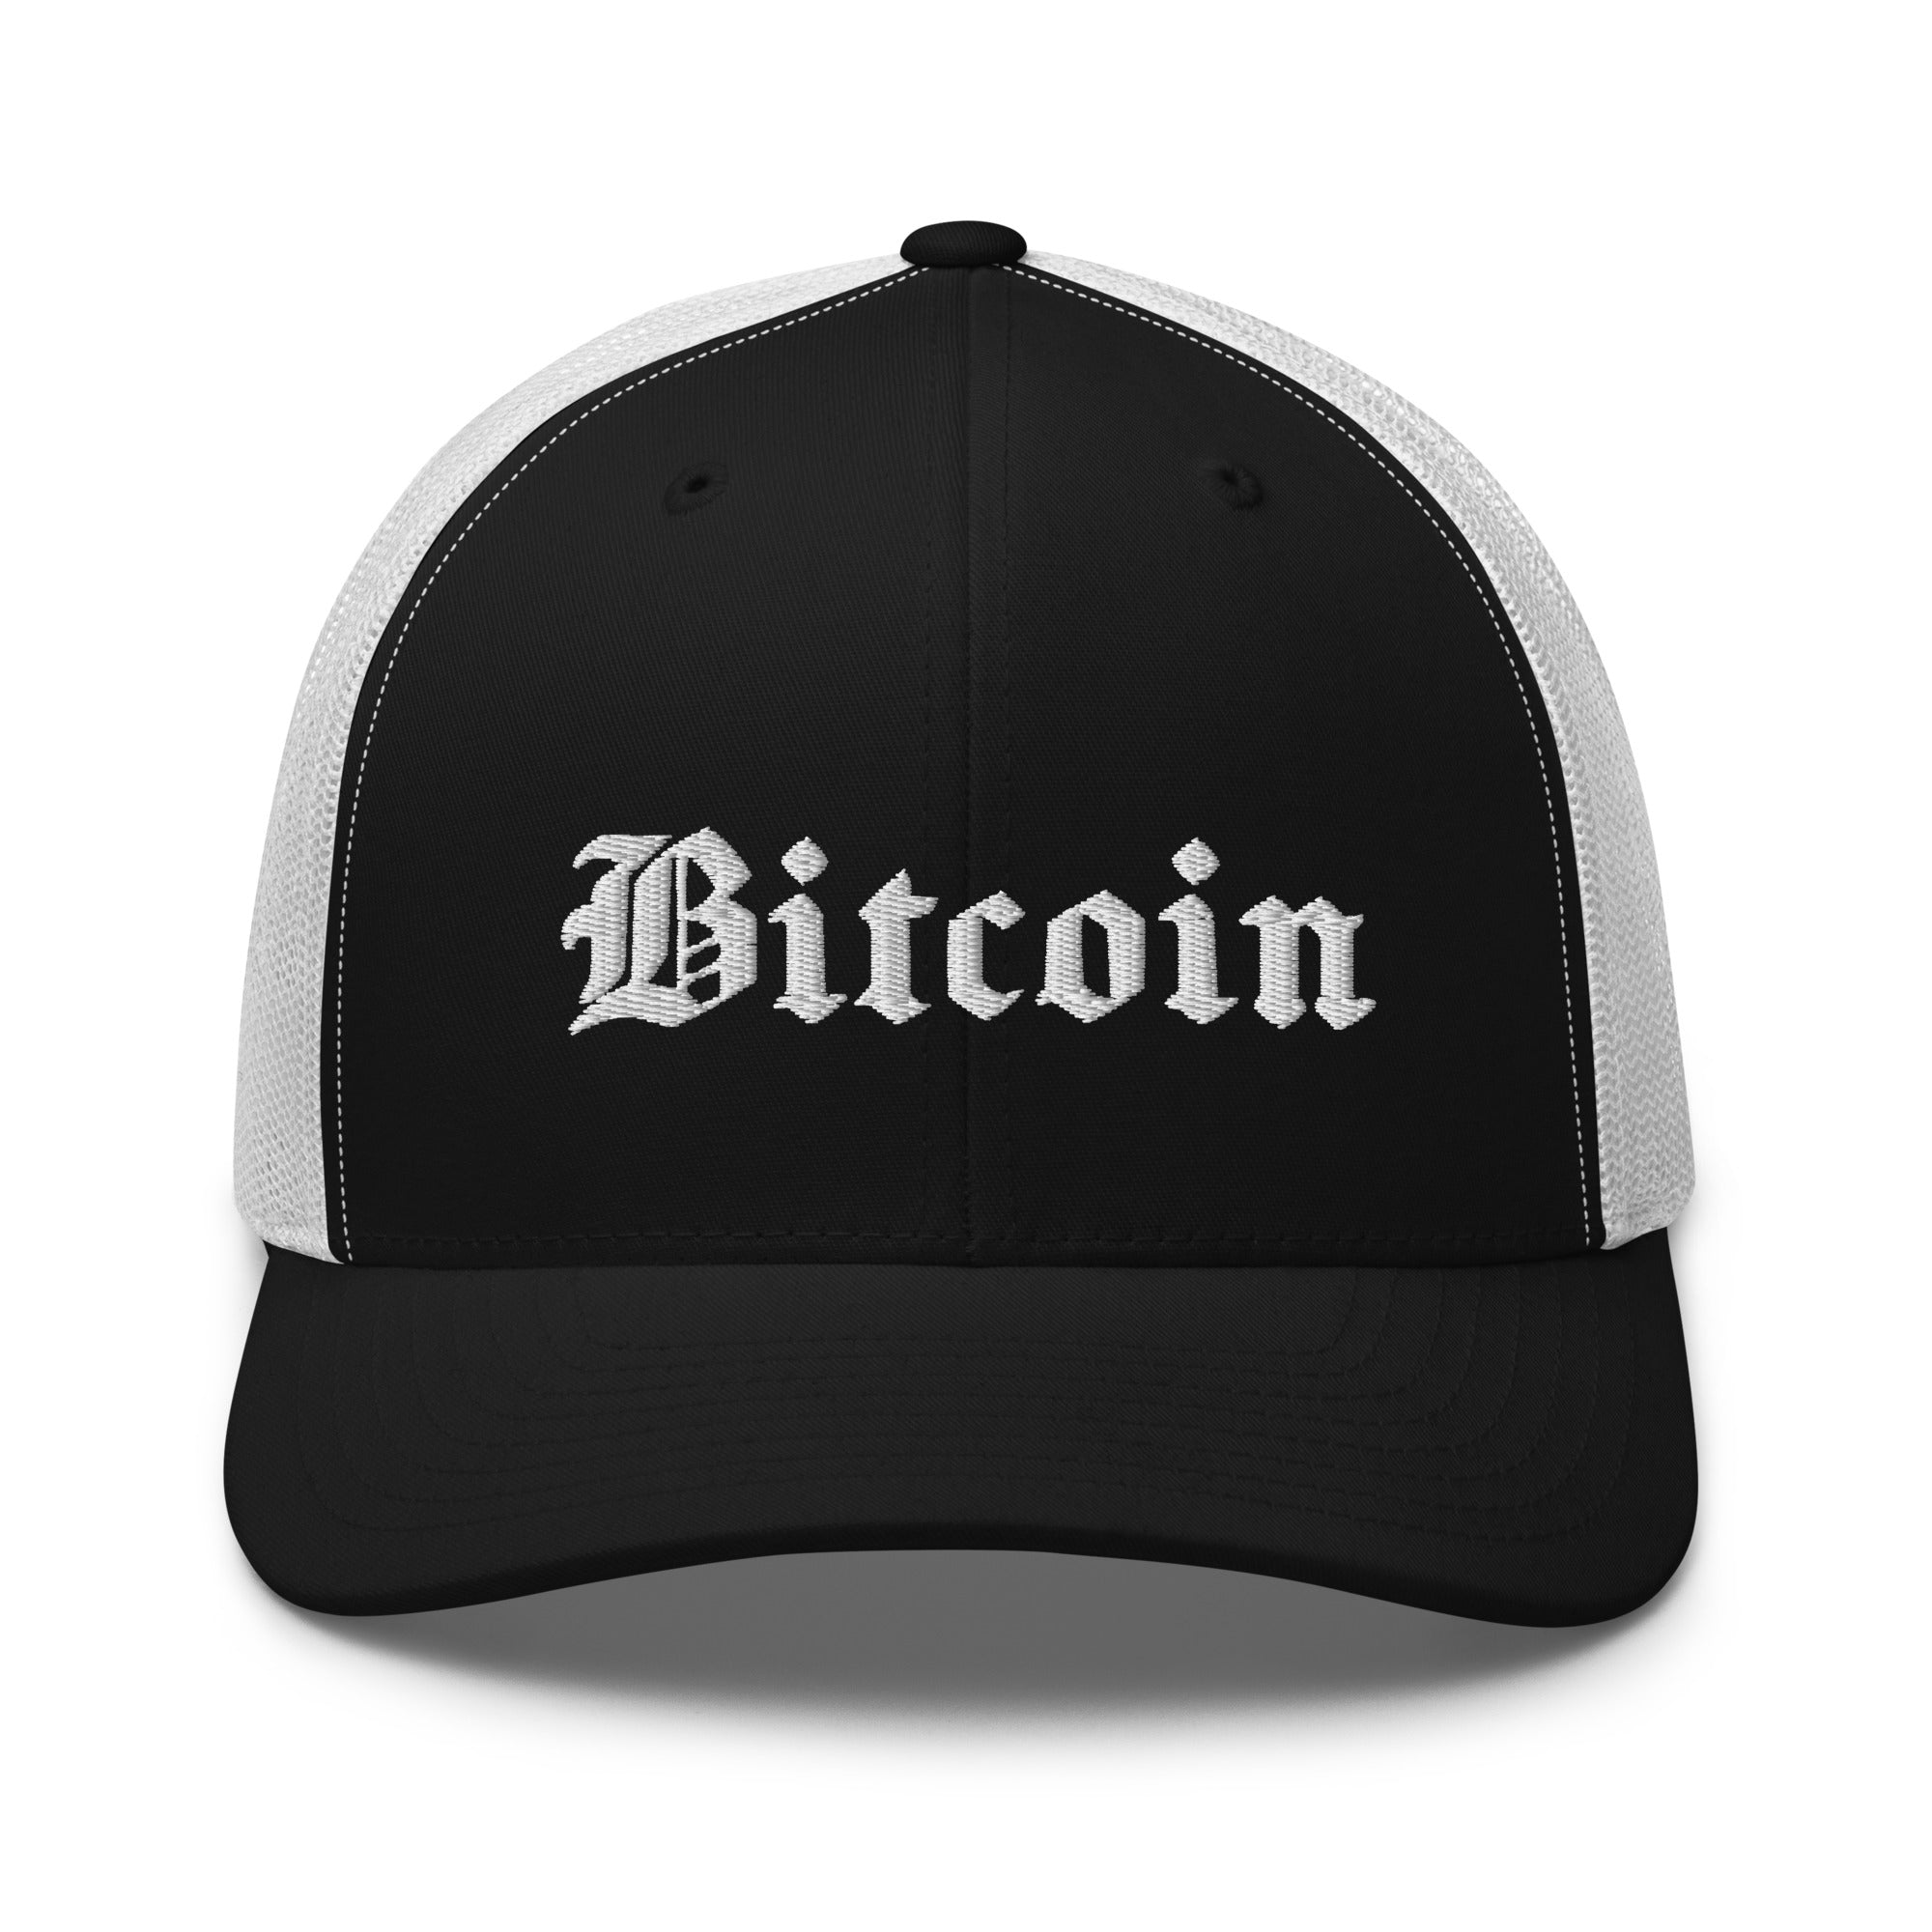 Bitcoin Hat - The Bitcoin Gothic Trucker Hat features a Gothic script logo on a black and white cap. Front view.